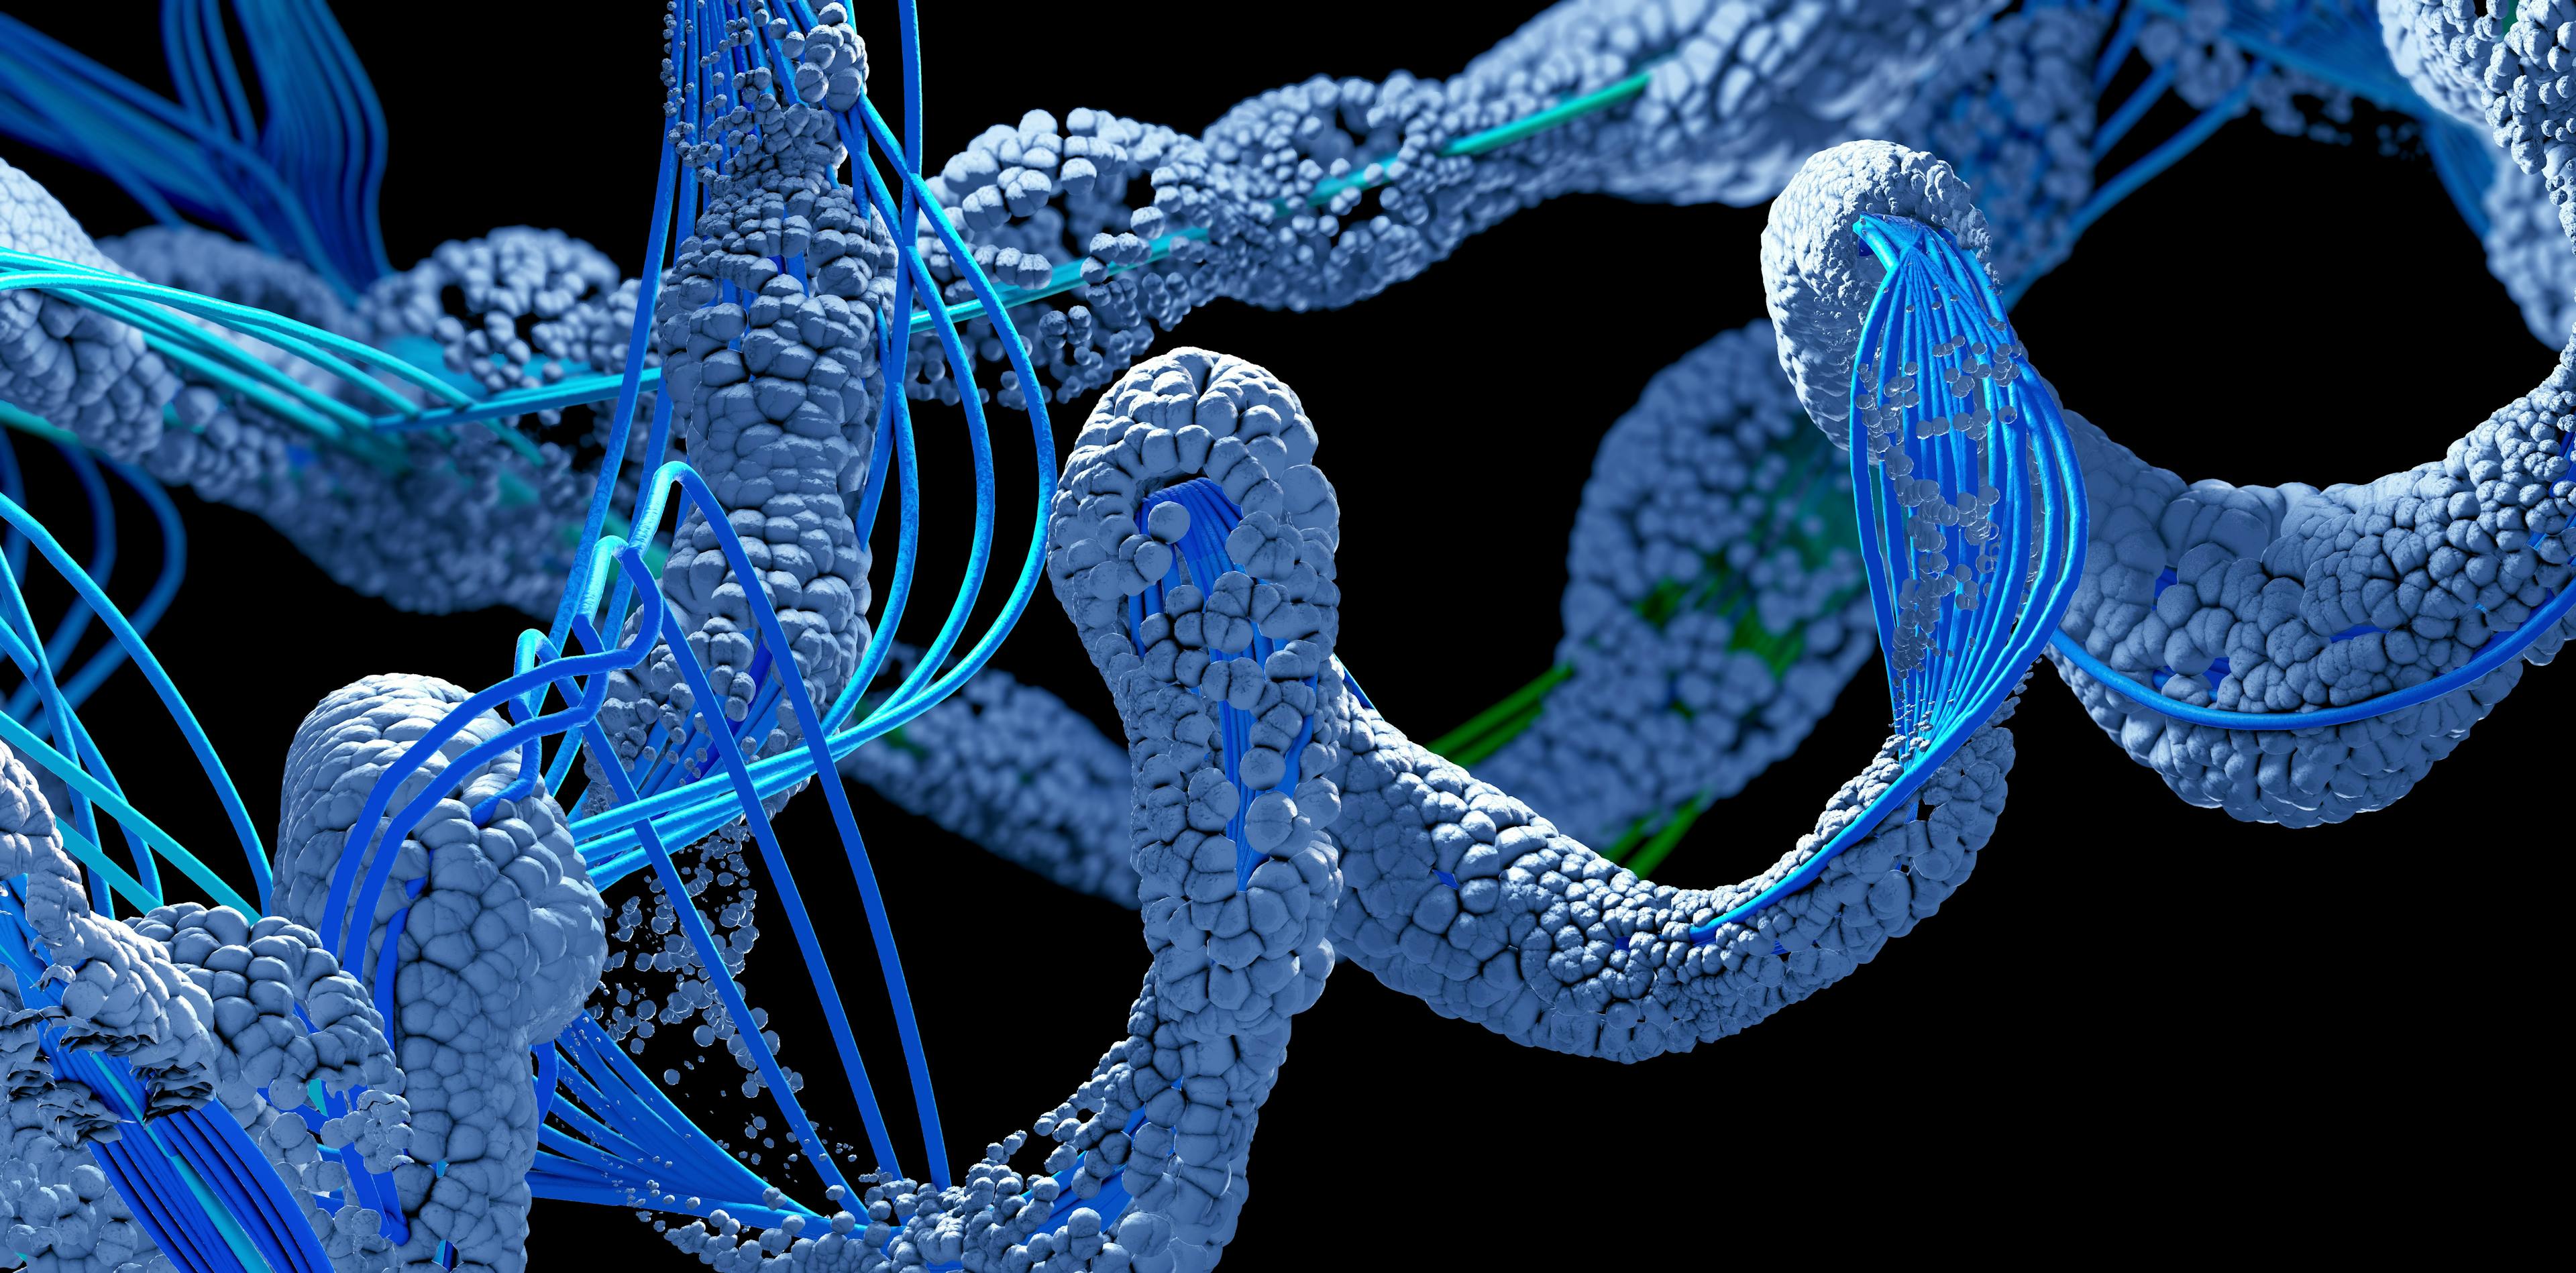 Chain of amino acid or bio molecules called protein - 3d illustration | Image Credit: © Christoph Burgstedt - stock.adobe.com